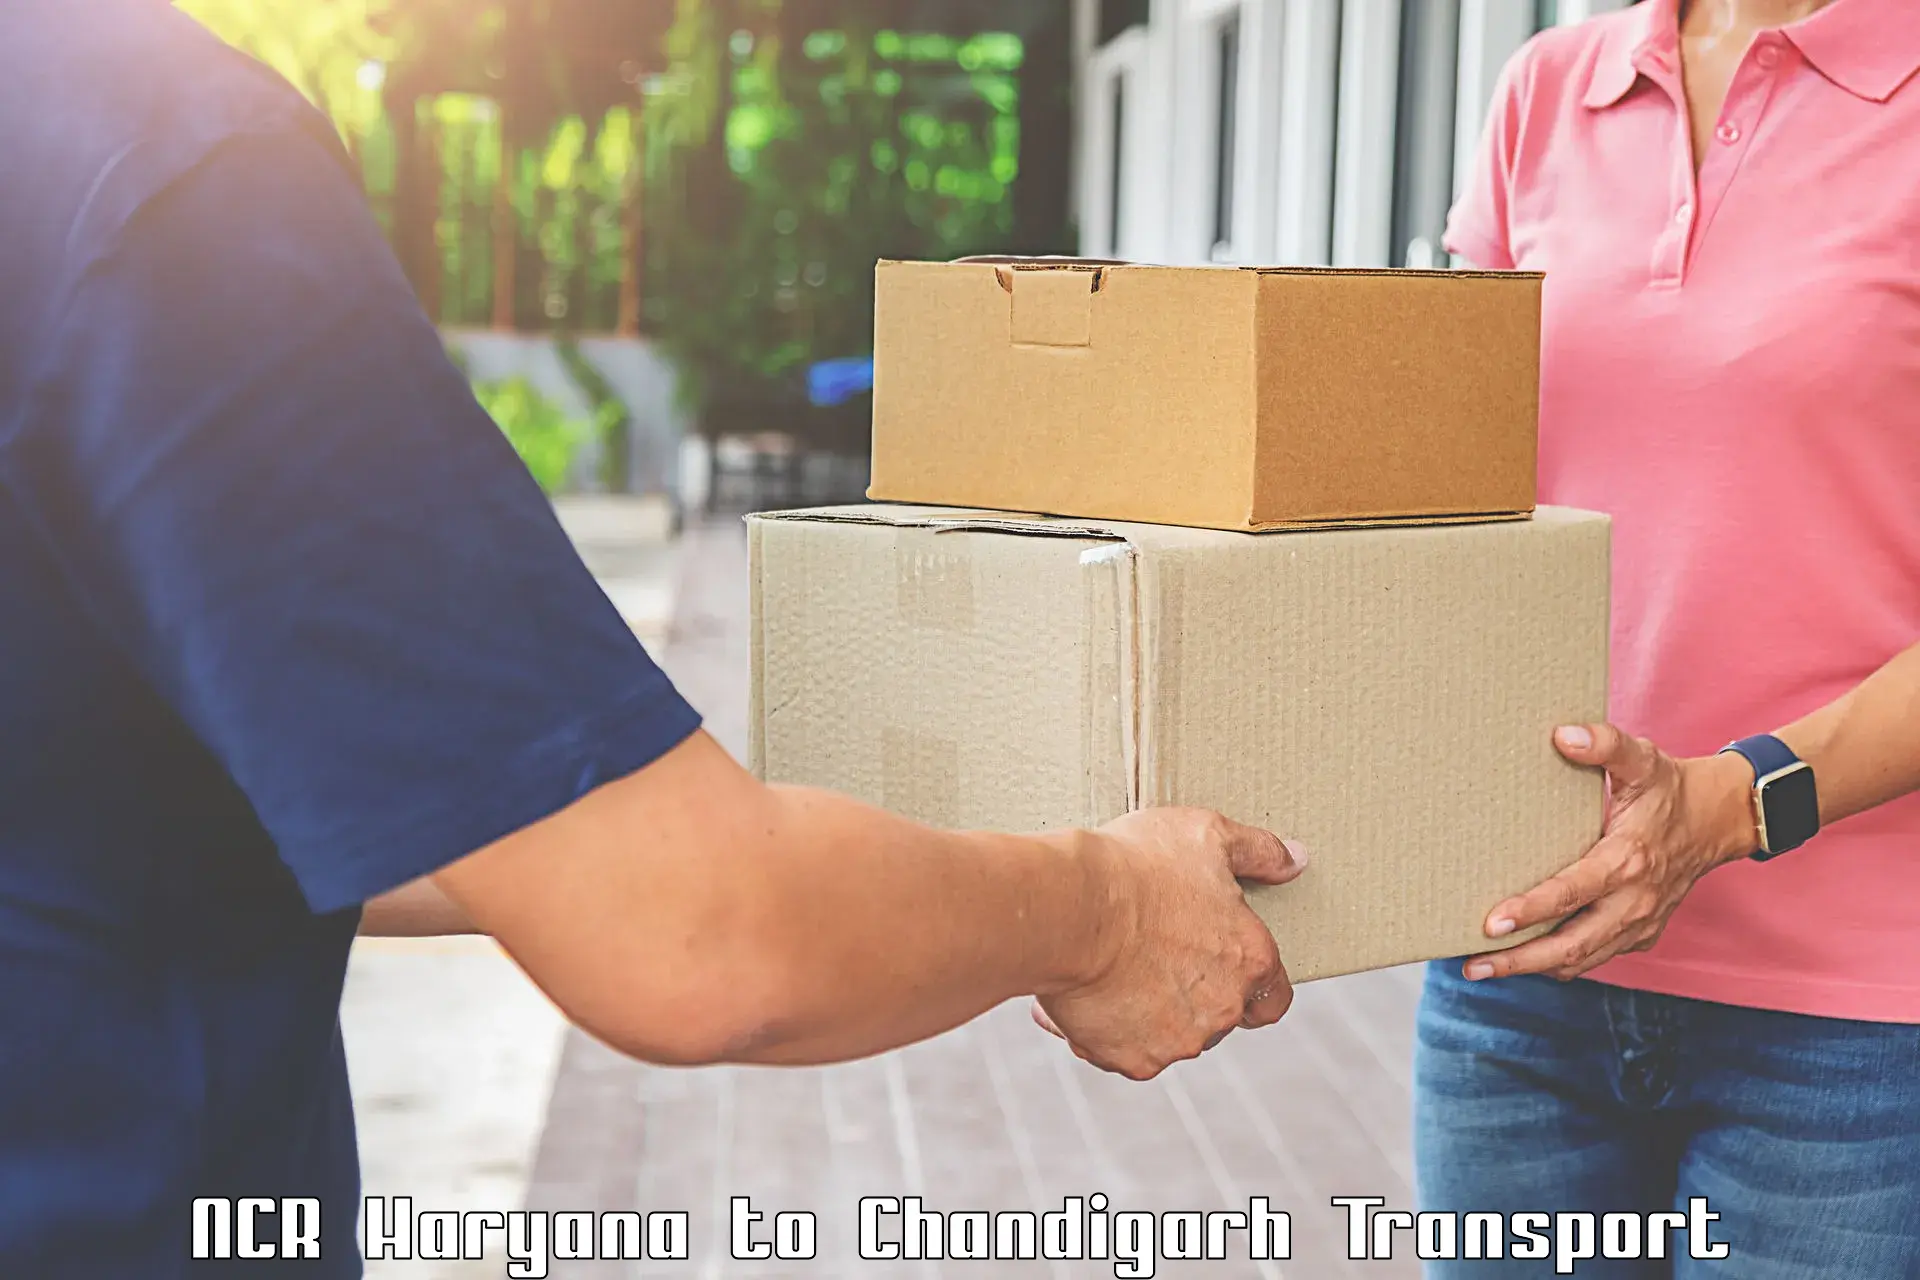 Parcel transport services NCR Haryana to Chandigarh